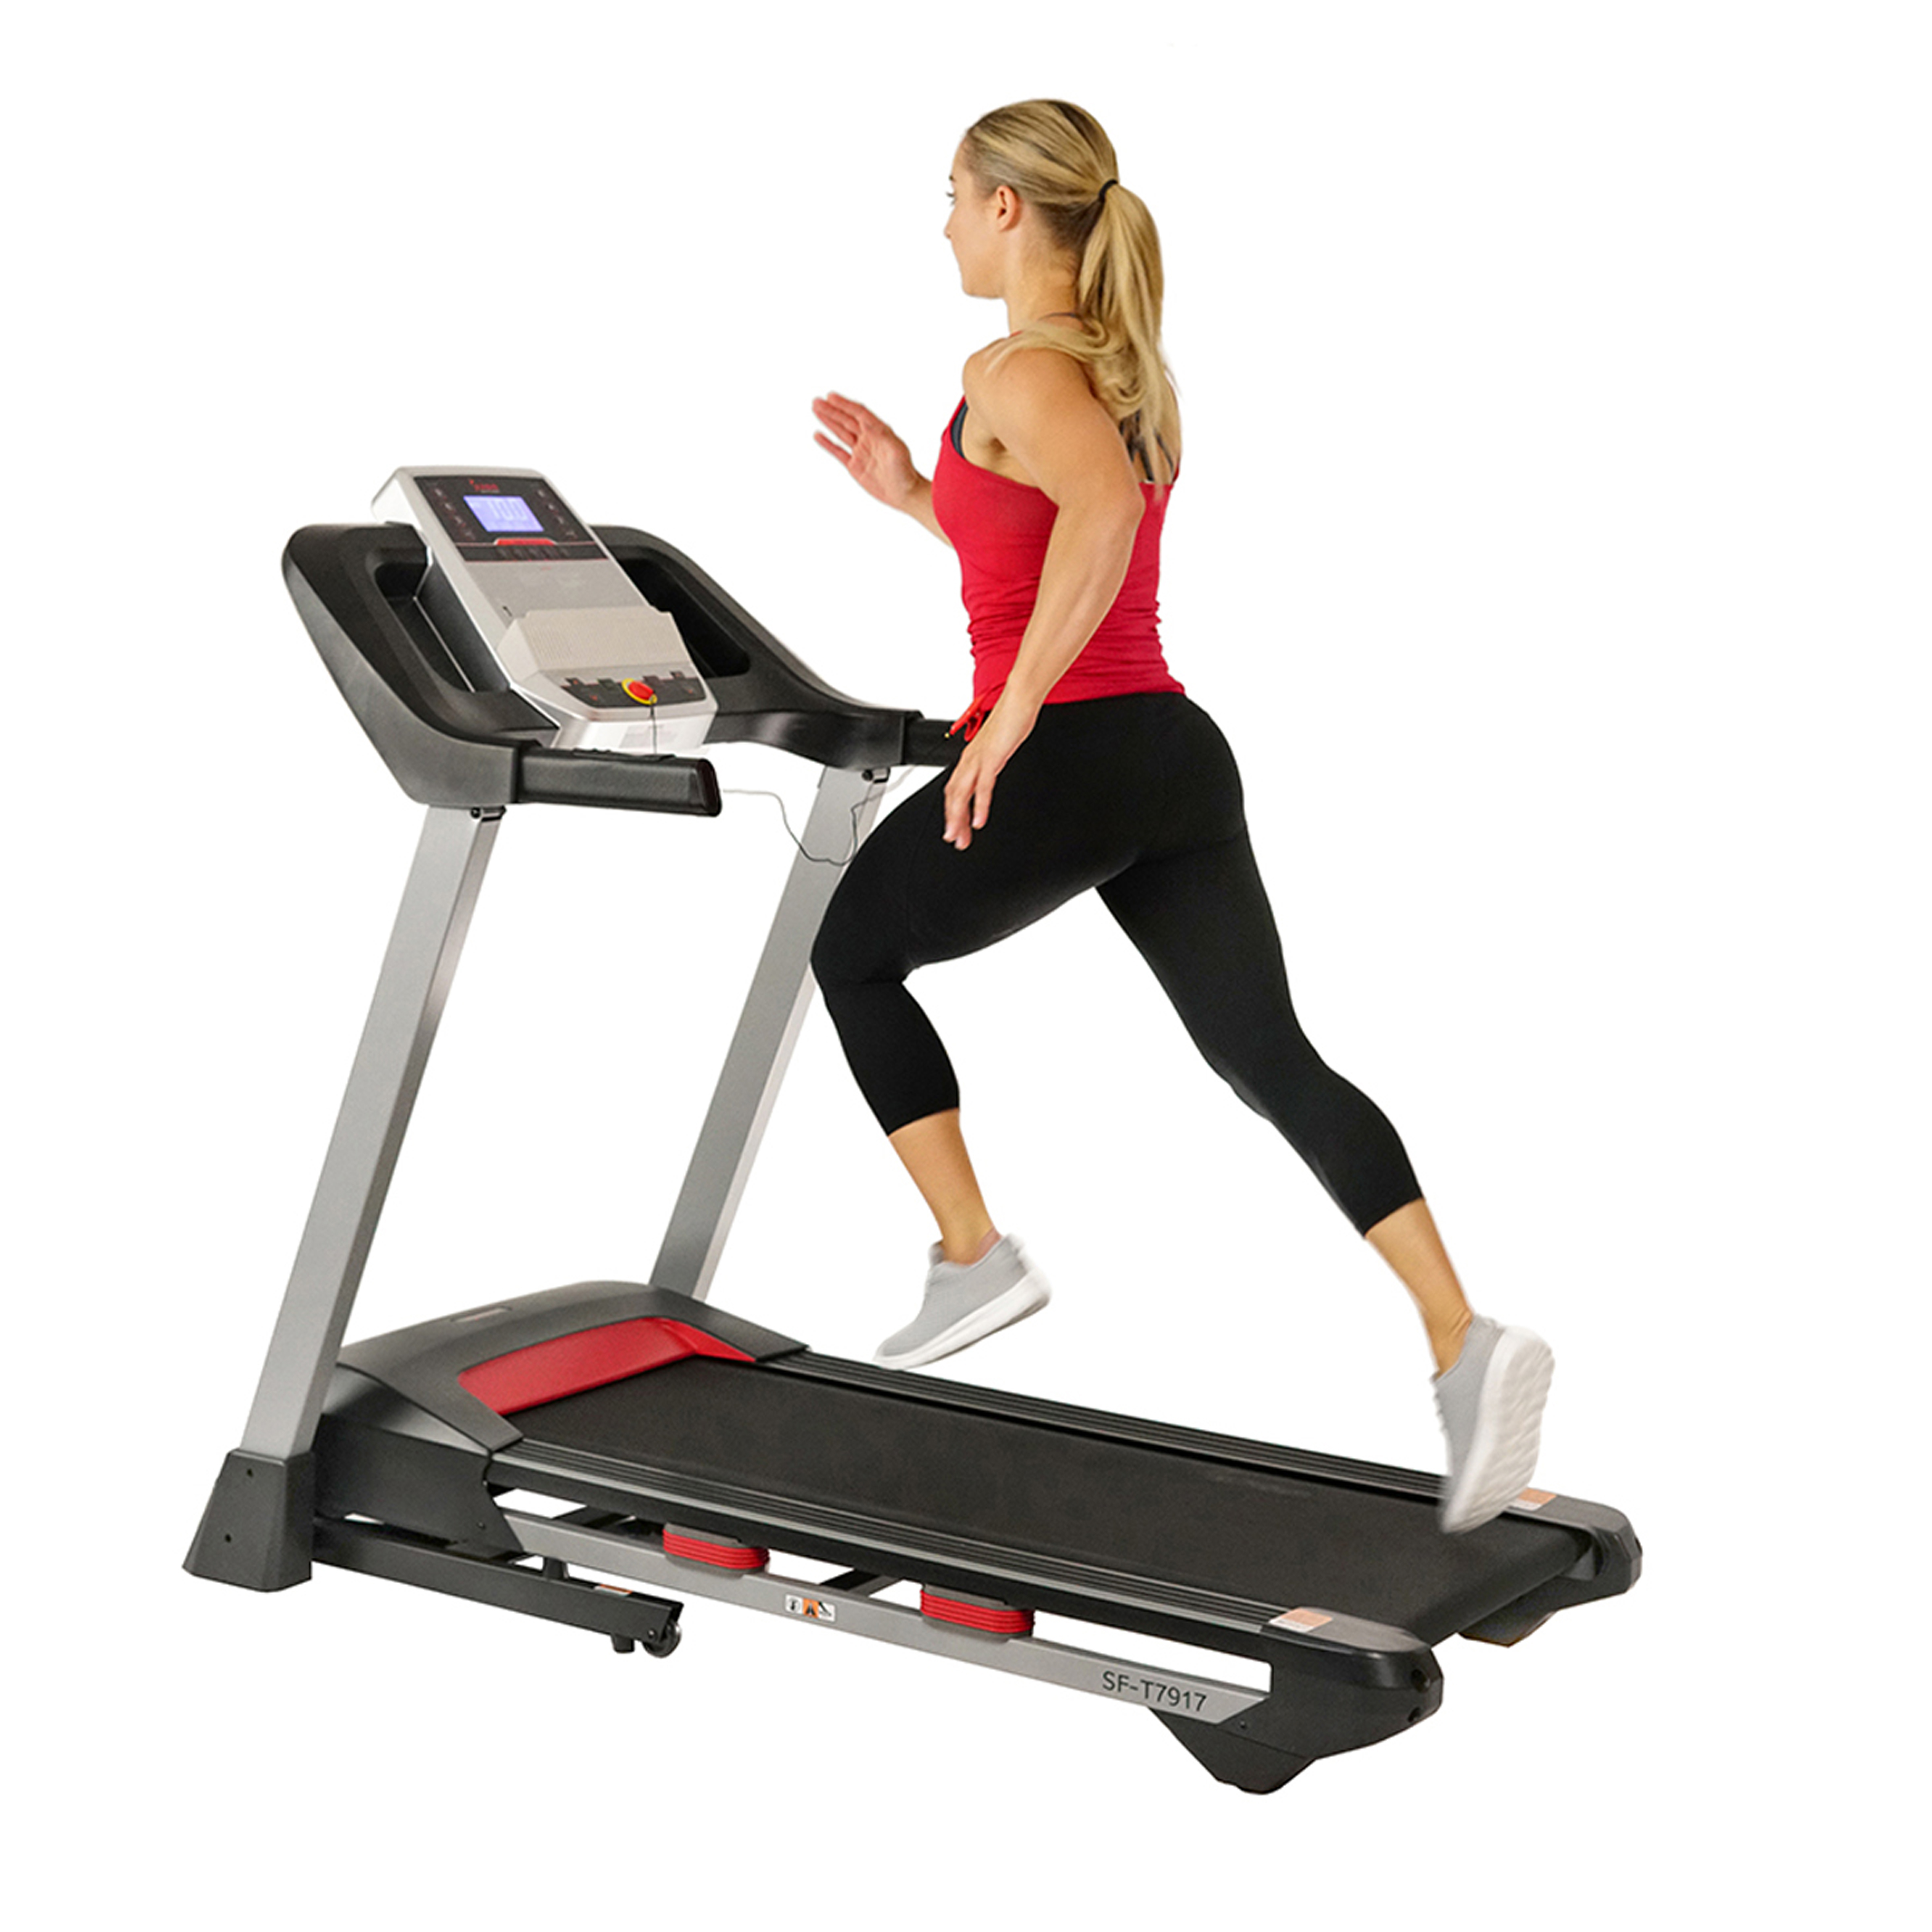 Sunny Health Fitness Electric Incline Treadmill, Bluetooth Speakers, USB Charge Function, Home Workout Exercise Machine, SF-T7917 - image 1 of 13